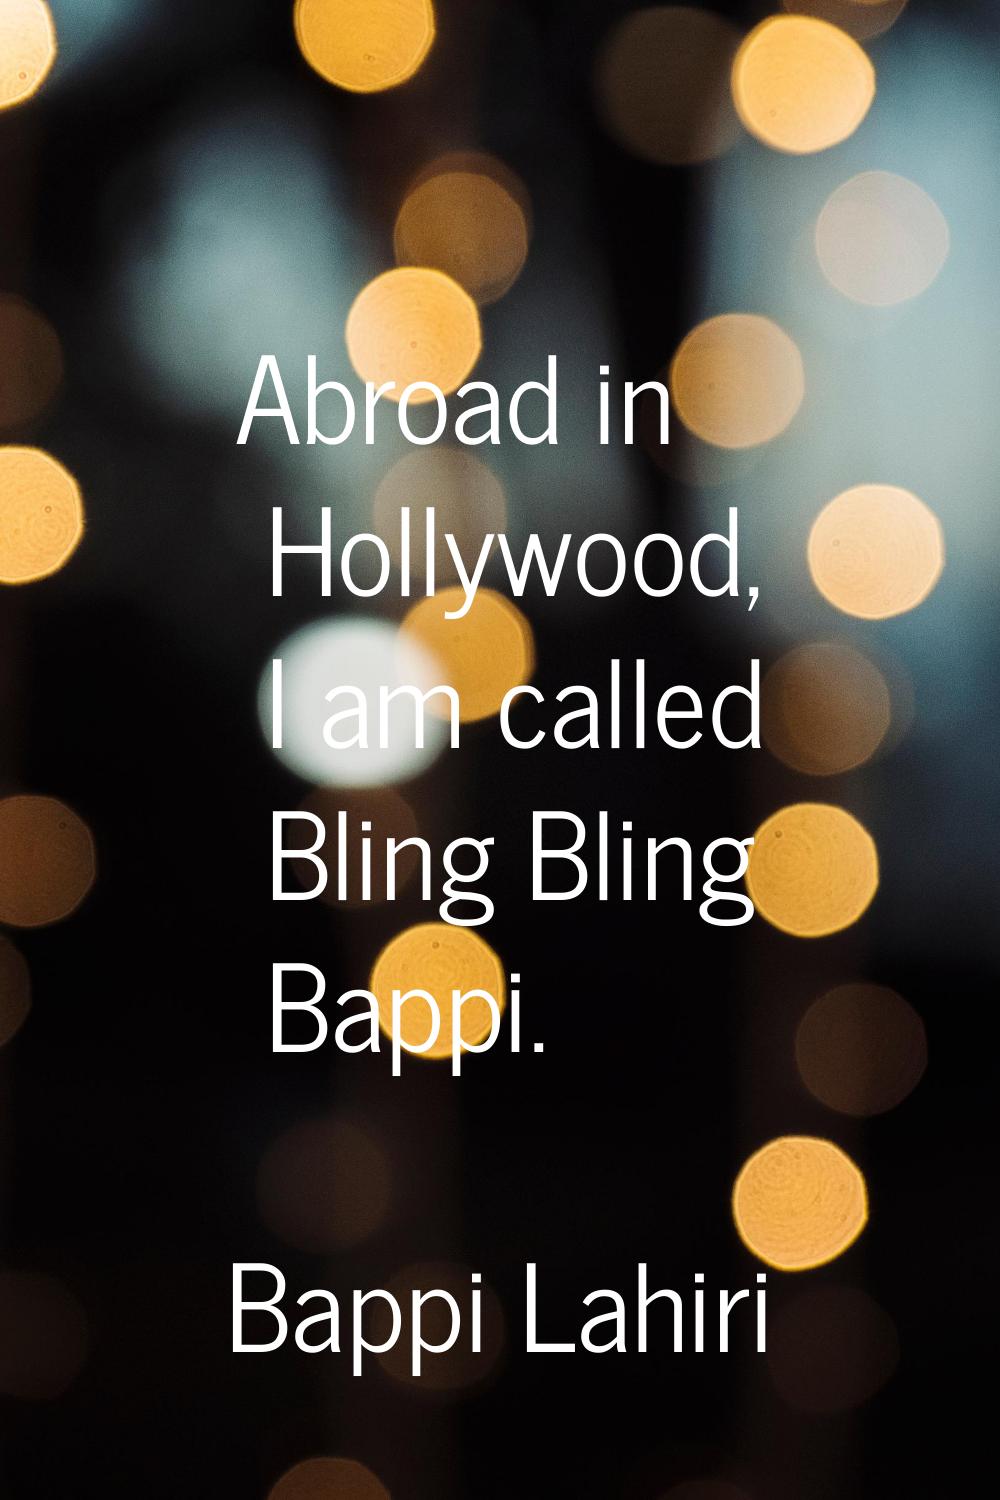 Abroad in Hollywood, I am called Bling Bling Bappi.